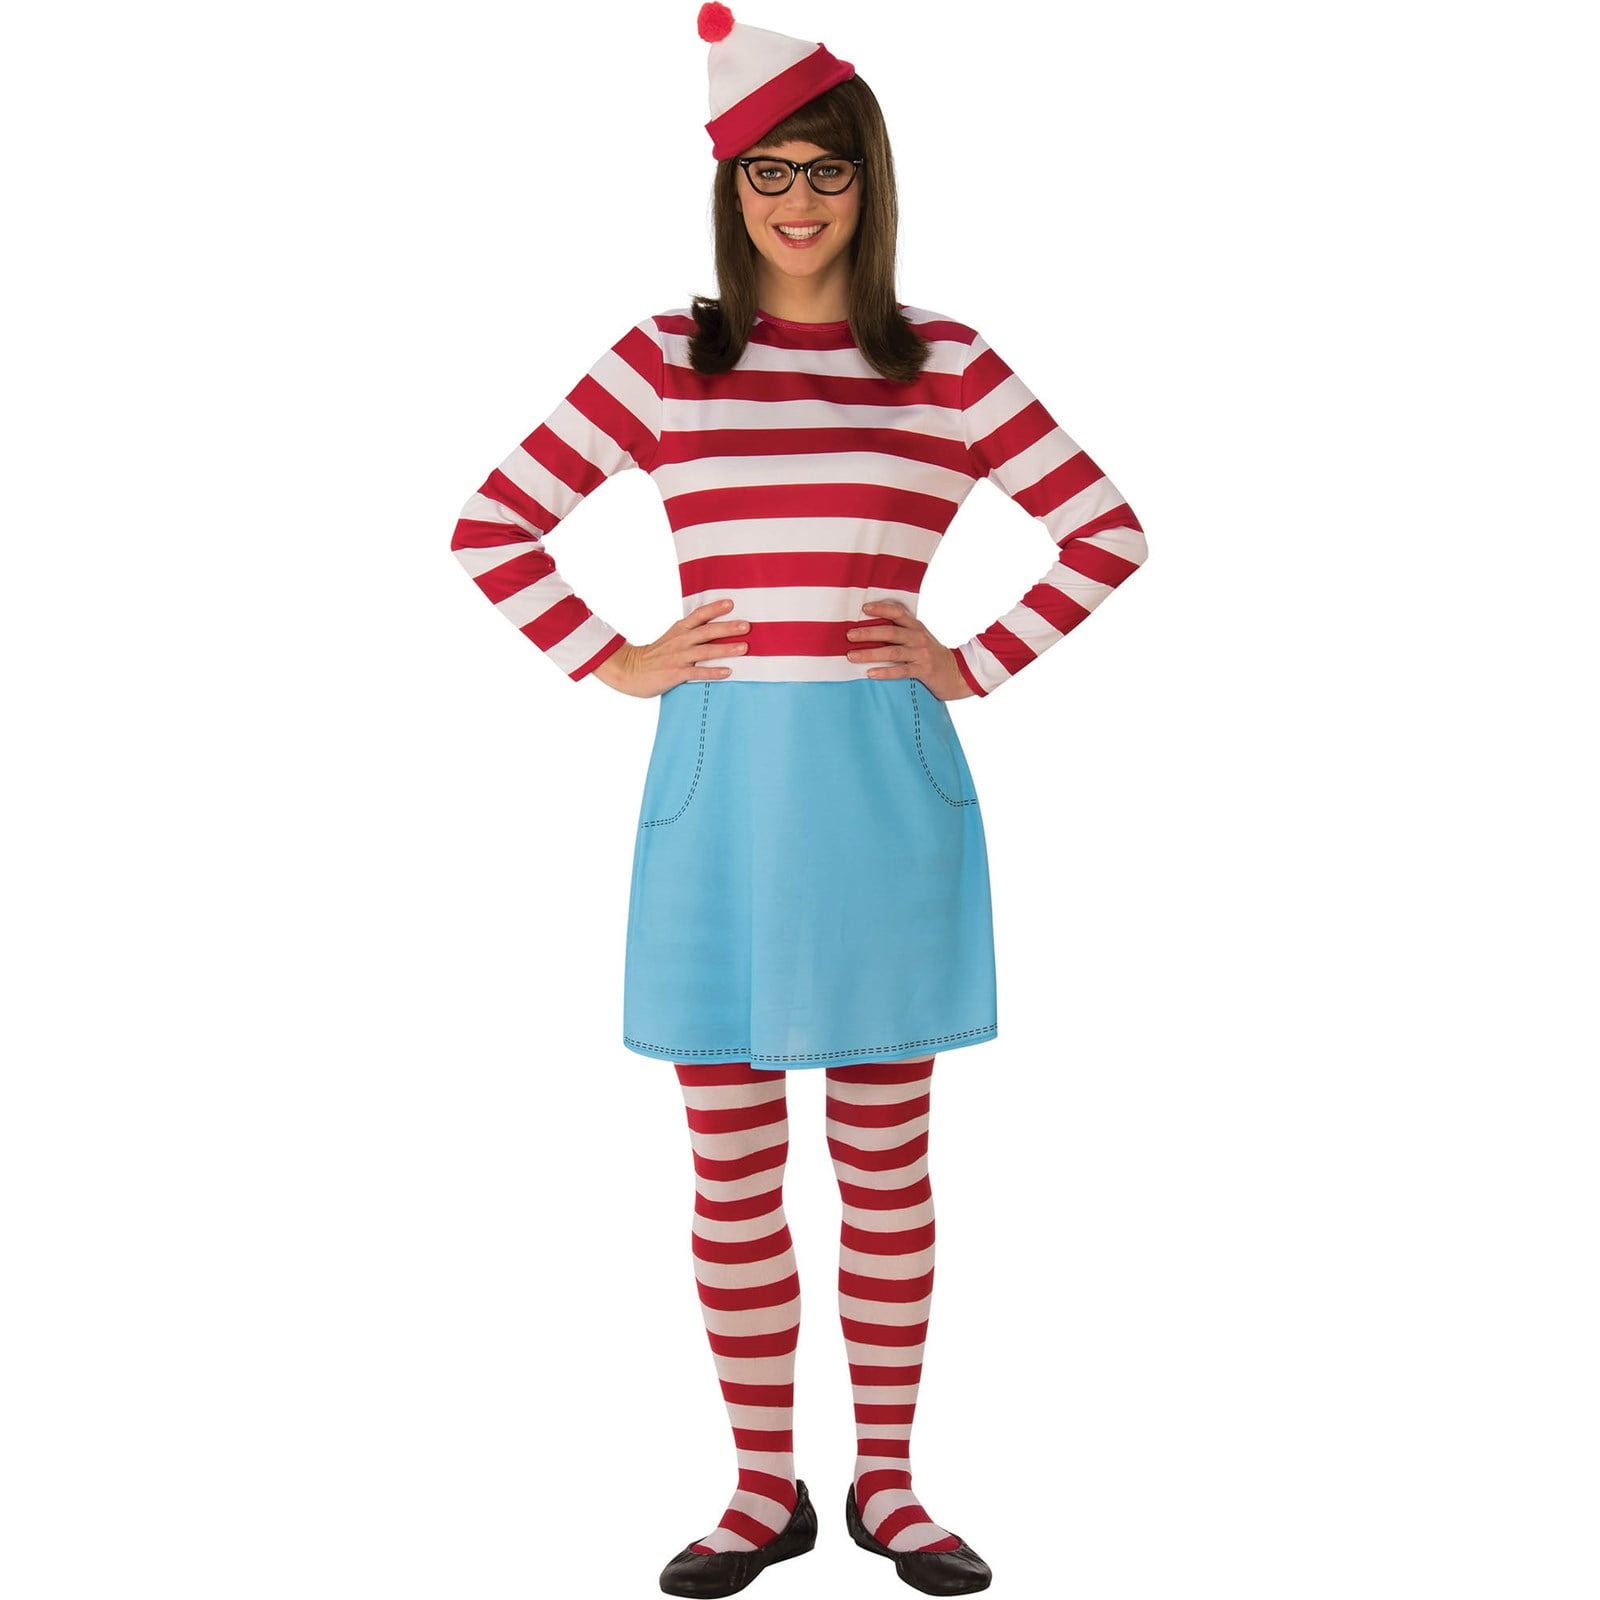 Where's Waldo Wally Deluxe Adult or Youth Costume Set 